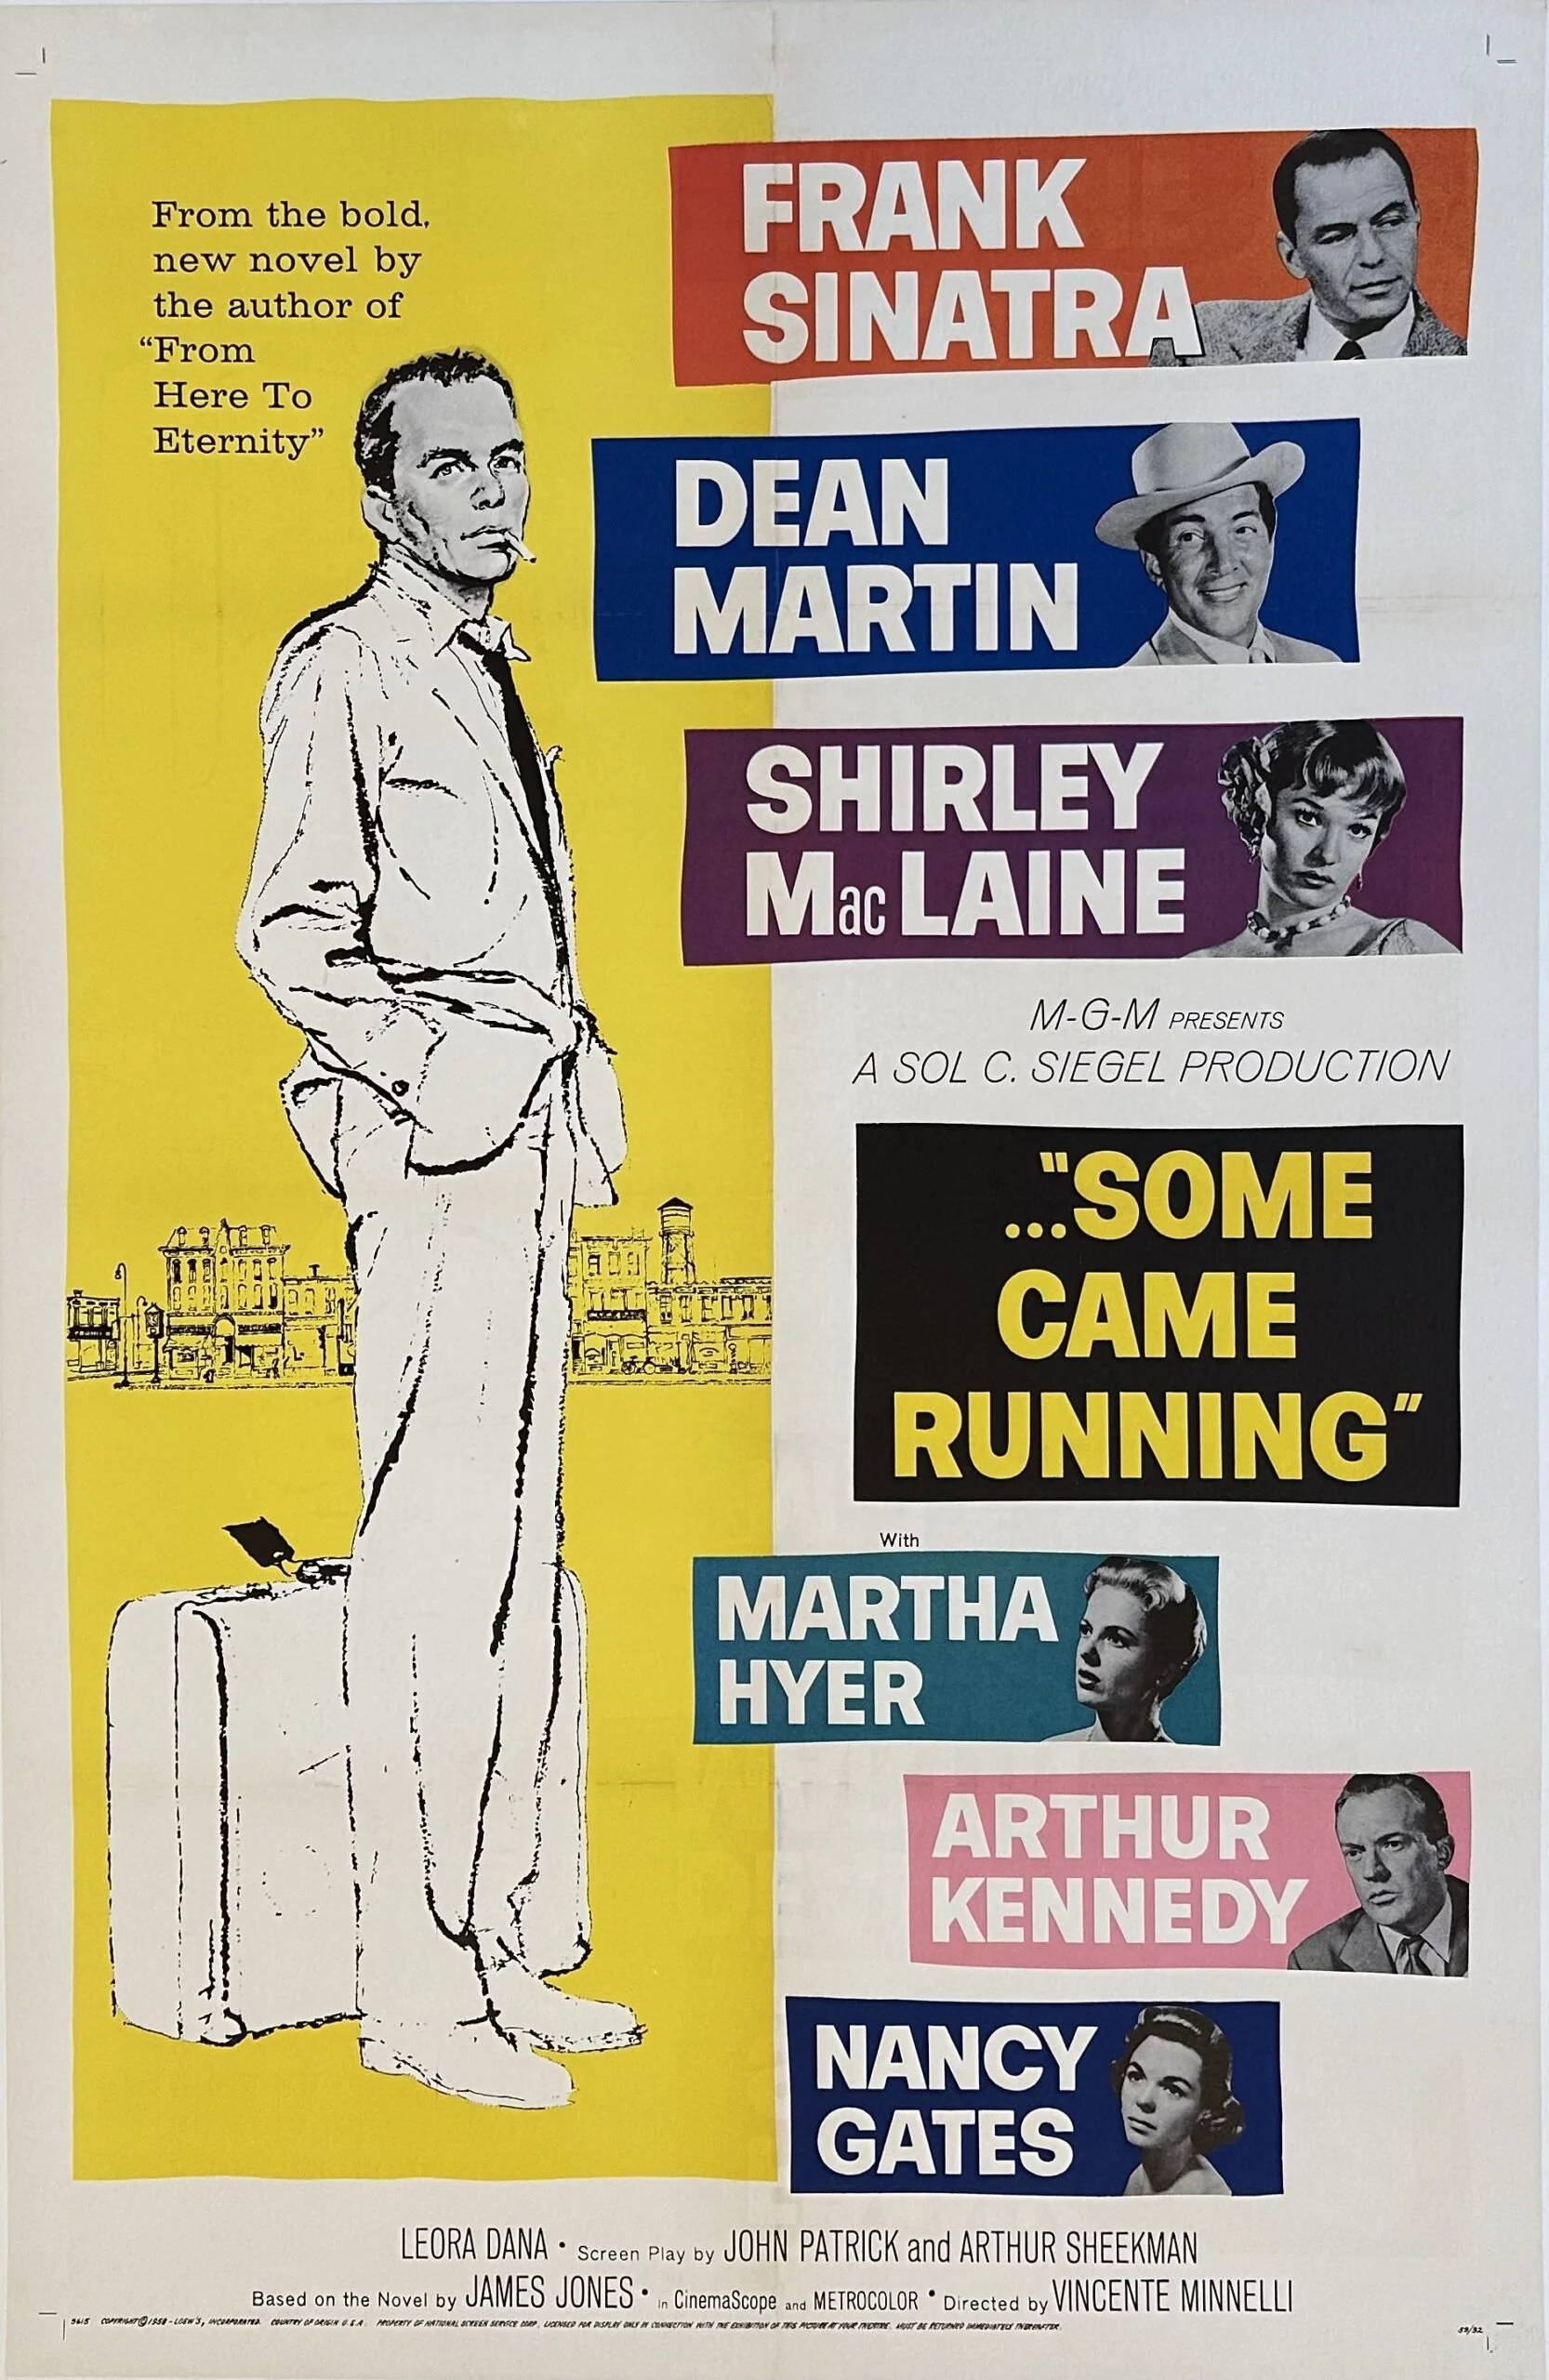 Original vintage cinema movie poster for Some Came running, starring Dean Martin and Frank Sinatra